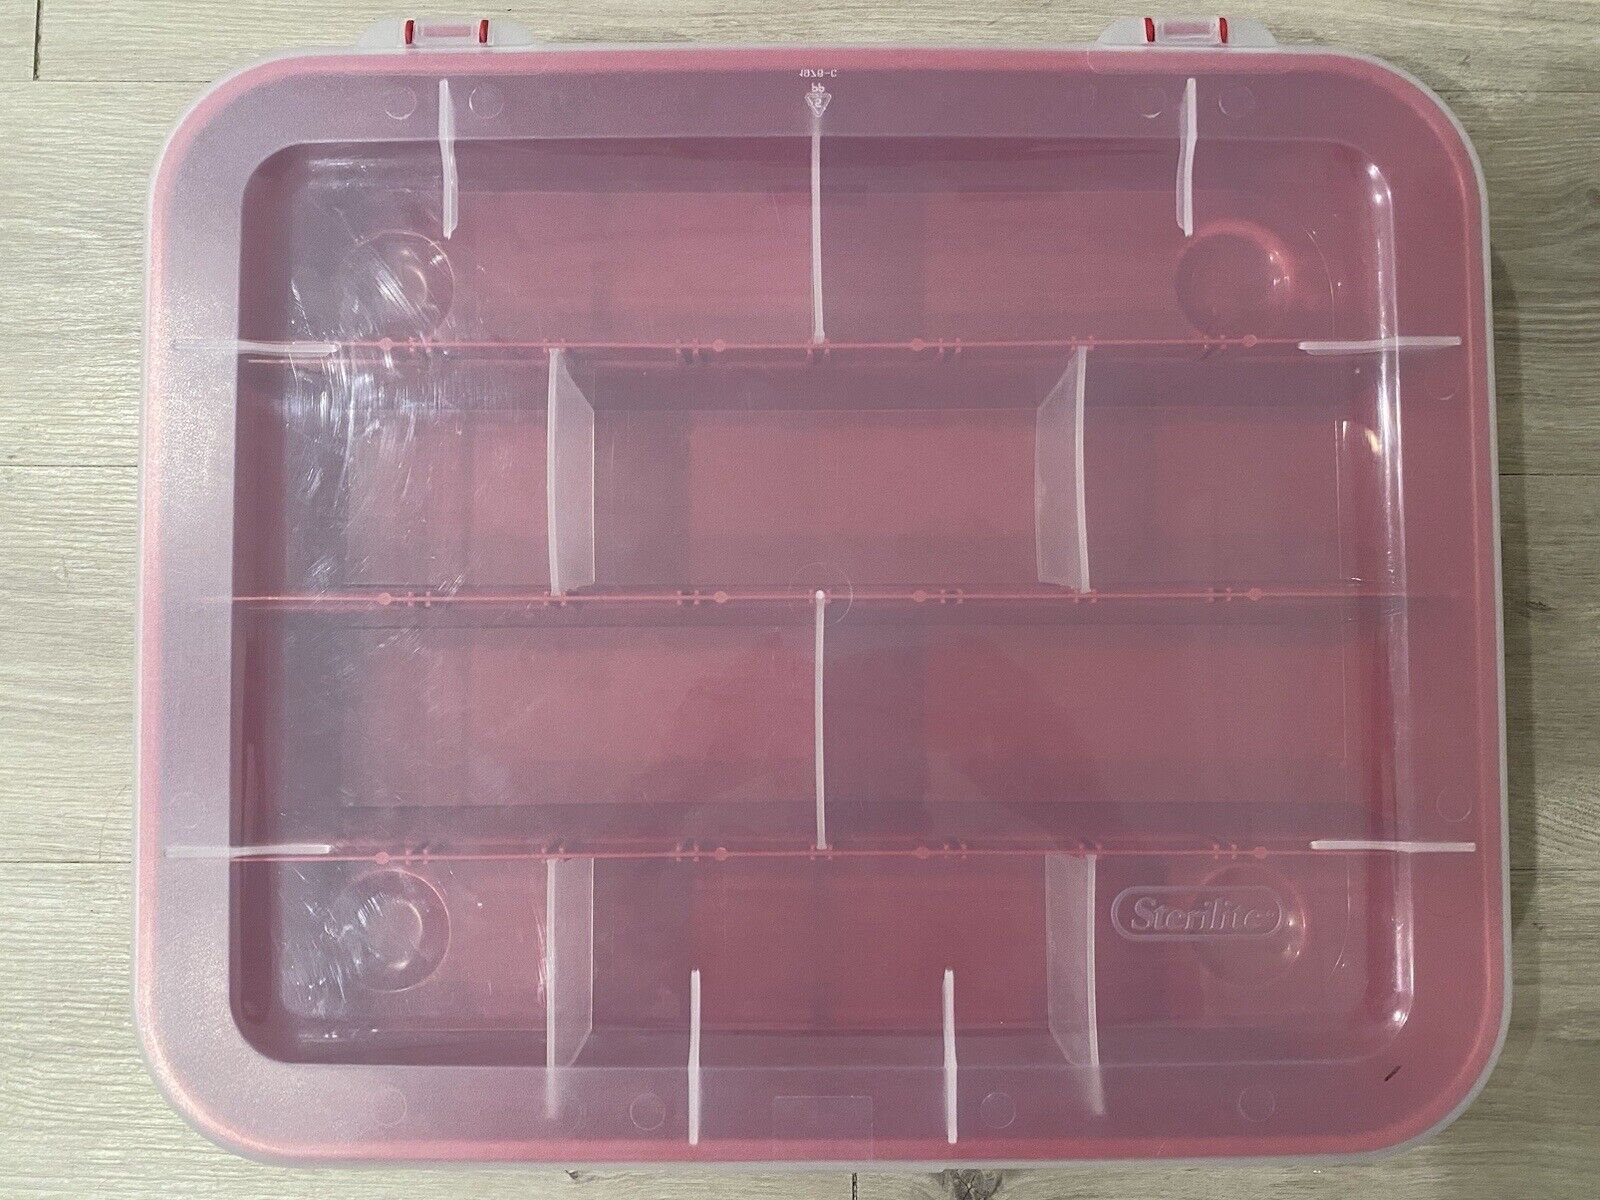 Sterilite brand plastic container boxes for collections